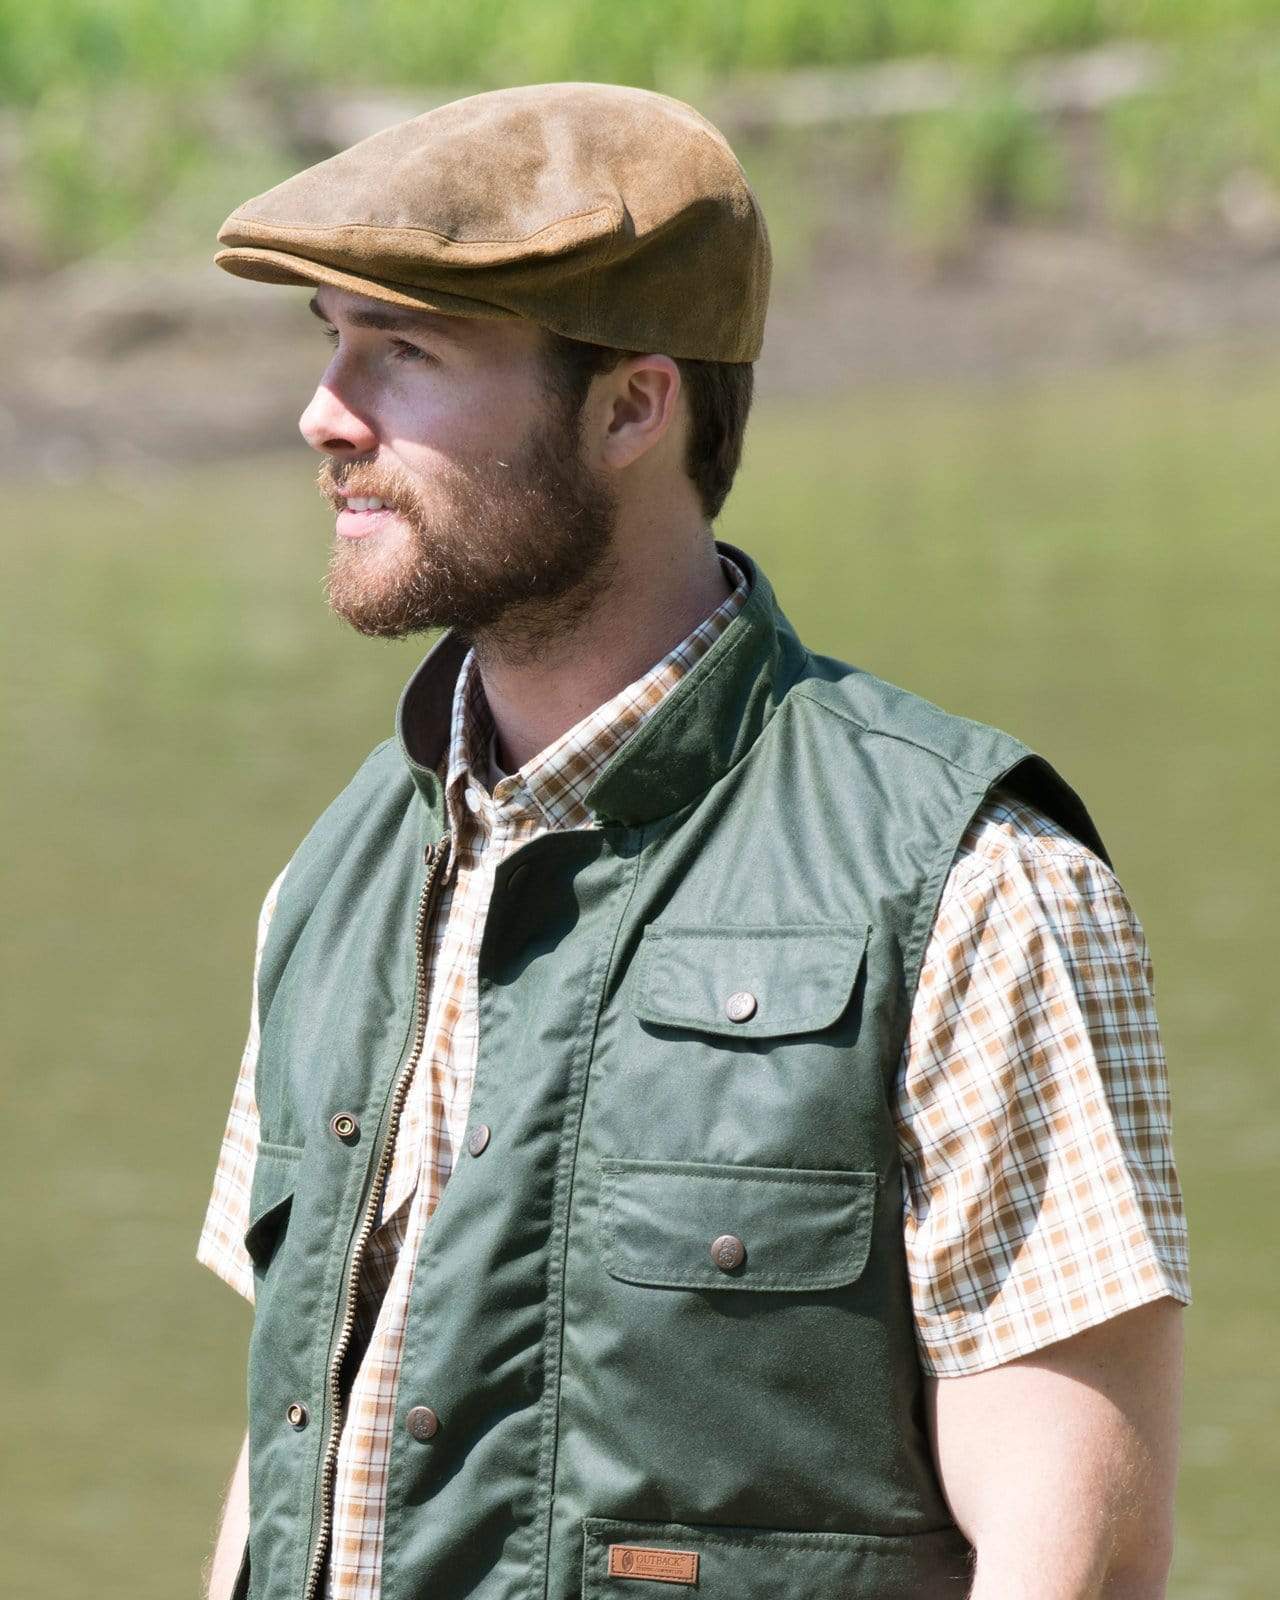 Outback Trading Company Leather Ascot Cap Hats